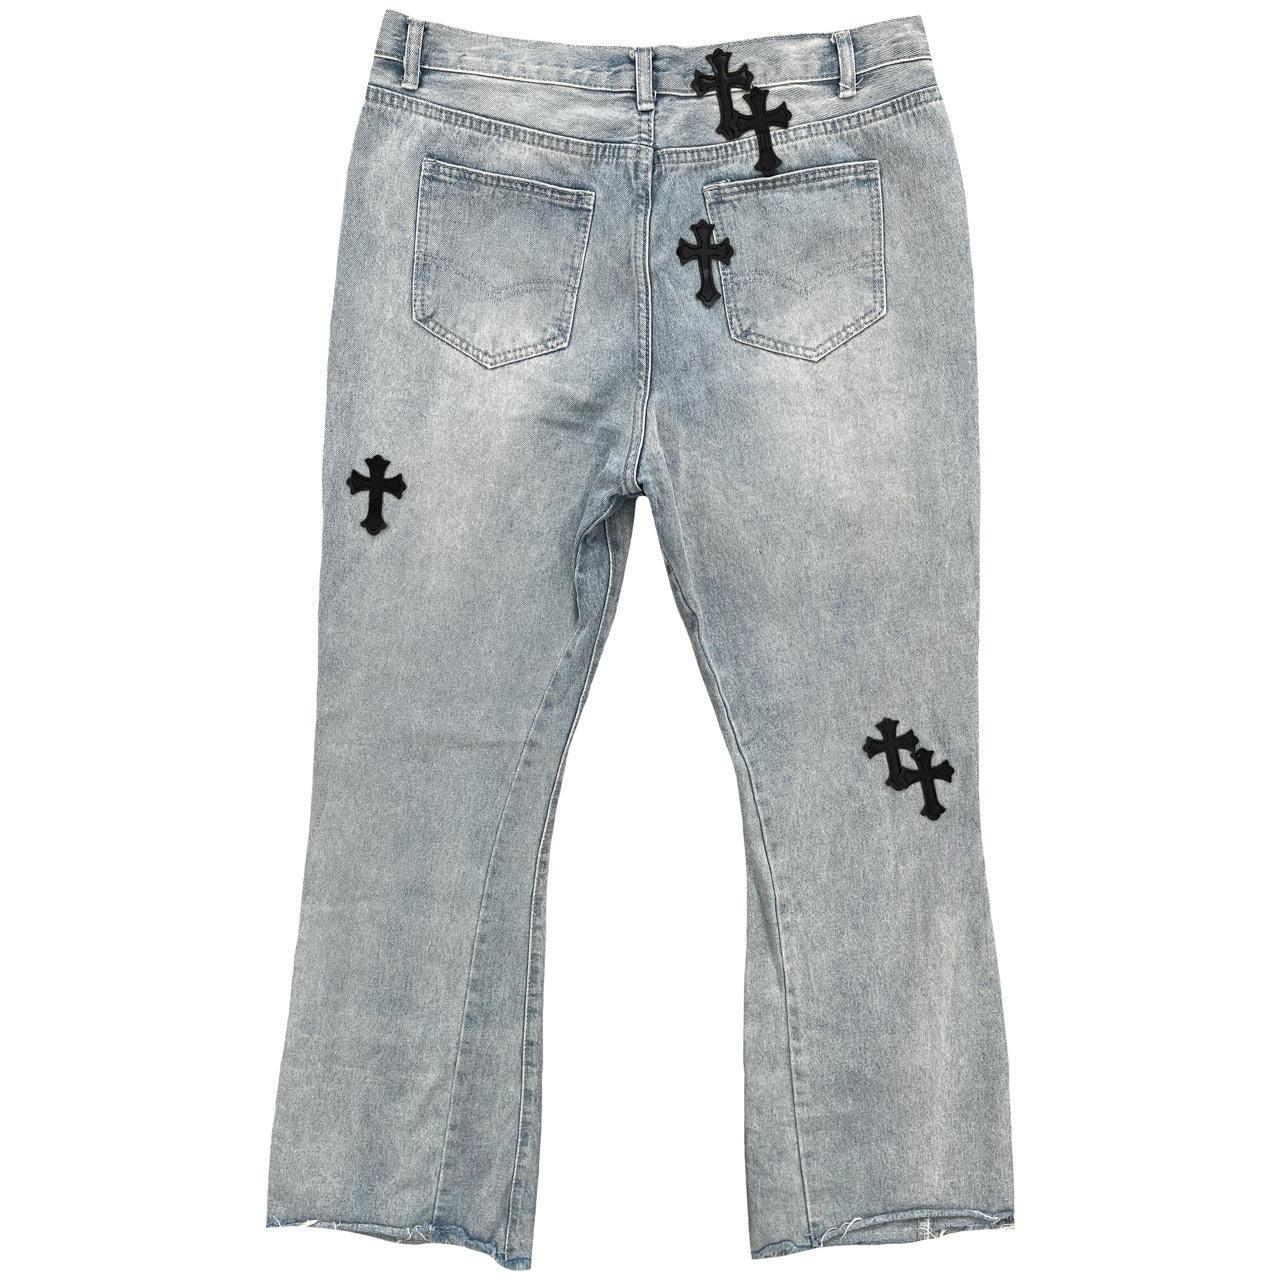 Flared Cross Patch Jeans - Known Source